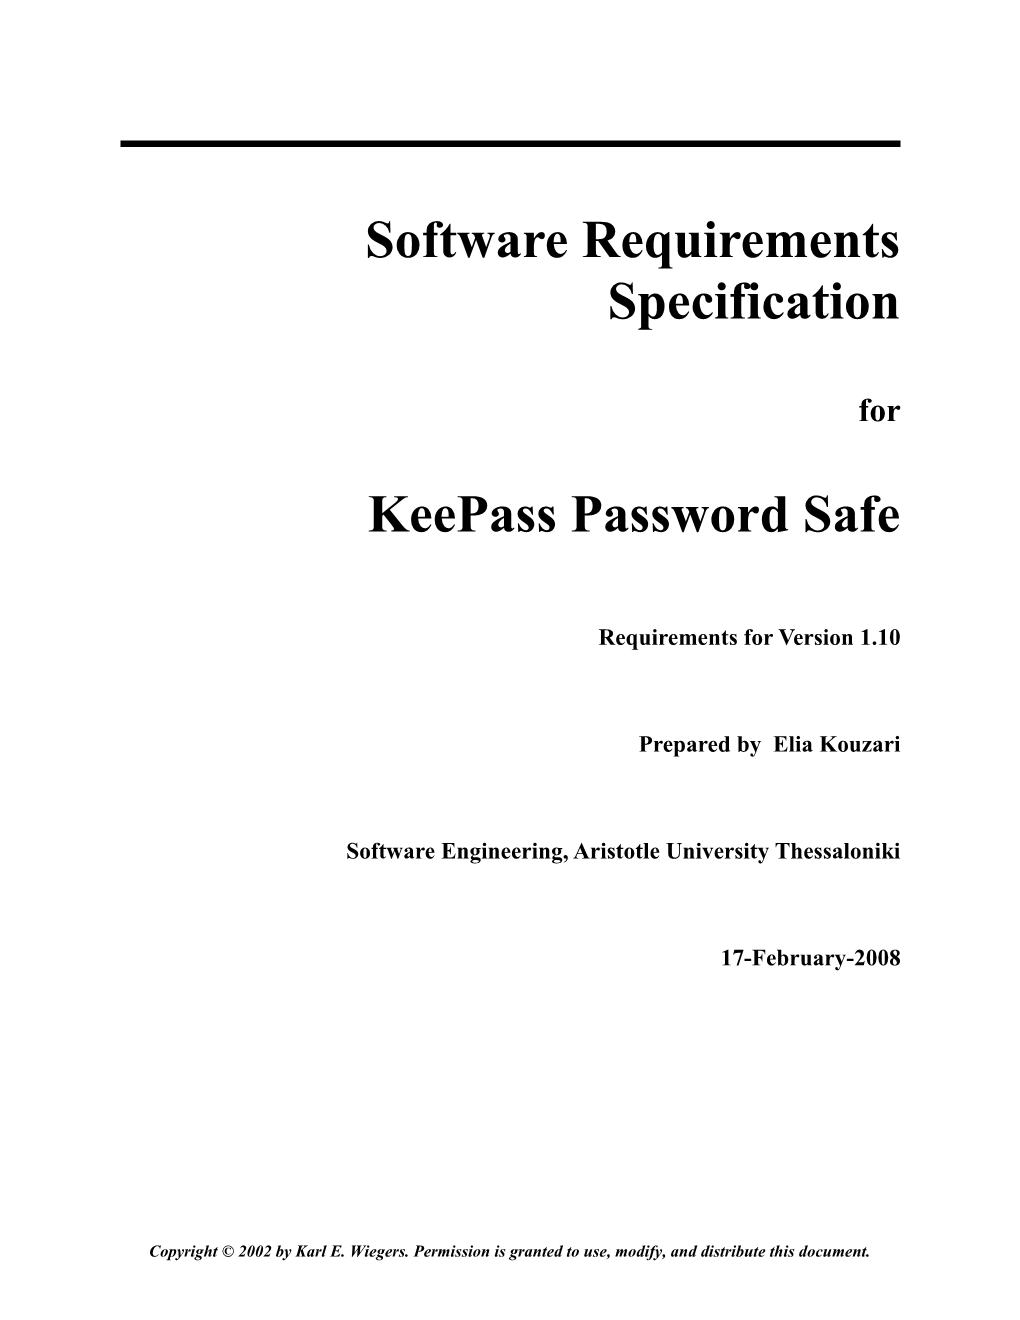 Software Requirements Specification Template s1